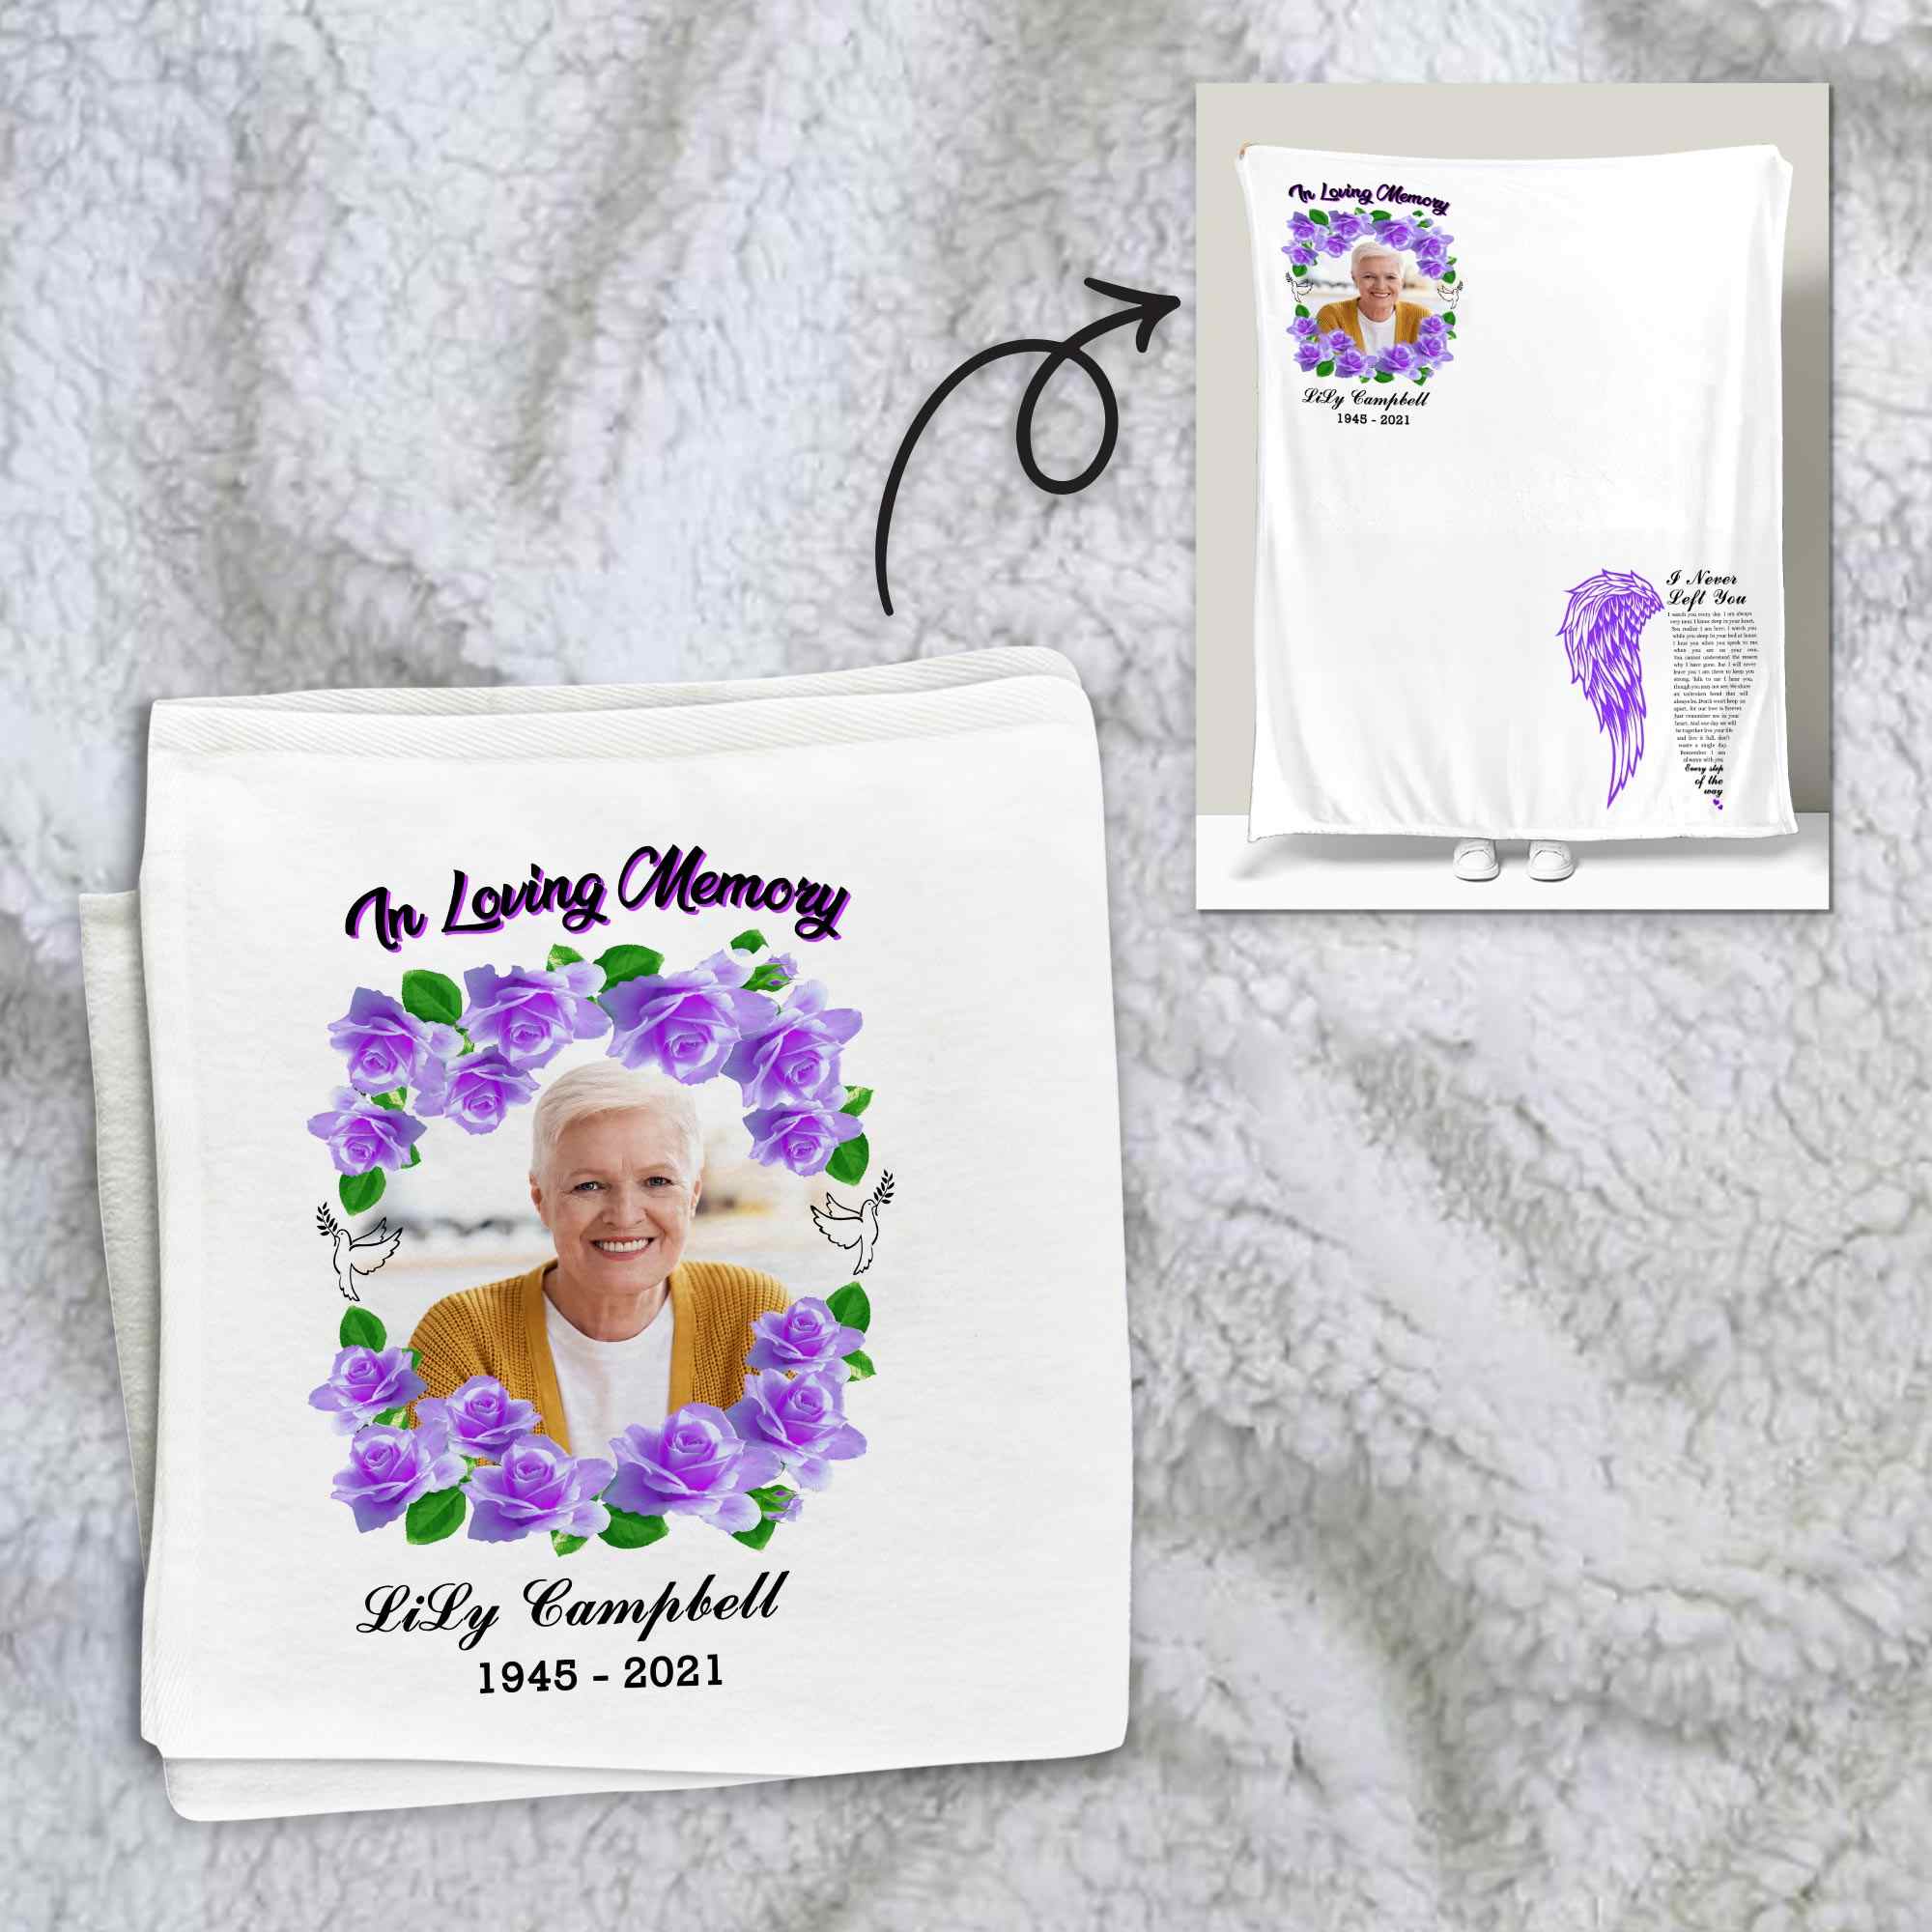 Memorial Blankets With Pictures, I Never Left You In Loving Memory Photo Blanket